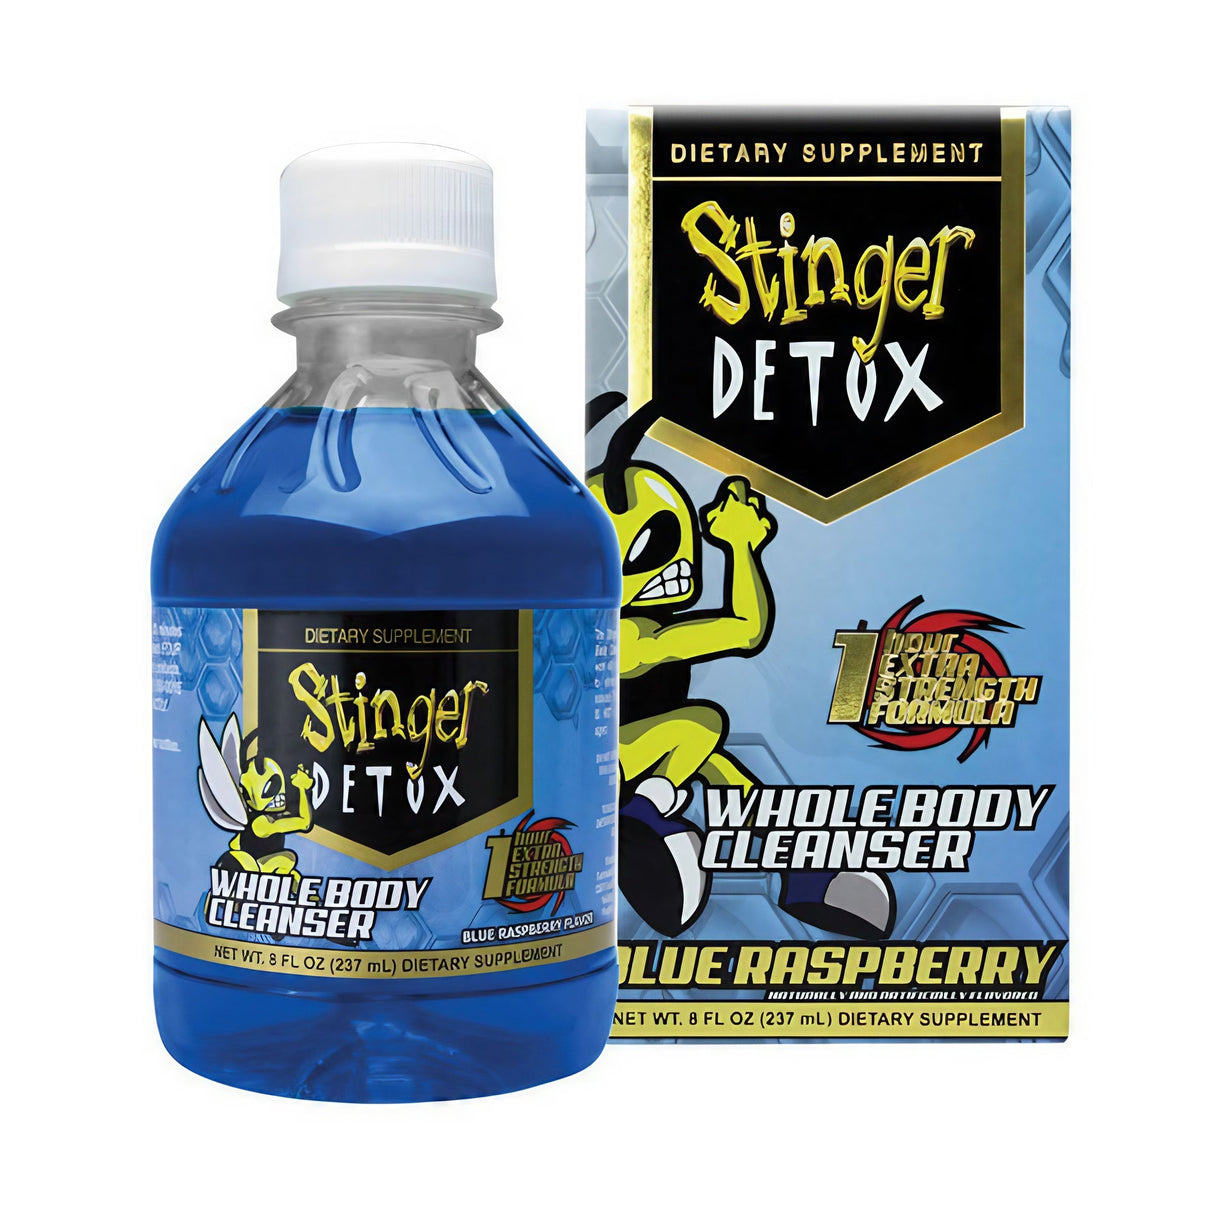 Stinger Detox Whole Body Cleanser 8oz bottle with Blue Raspberry flavor, front view with box